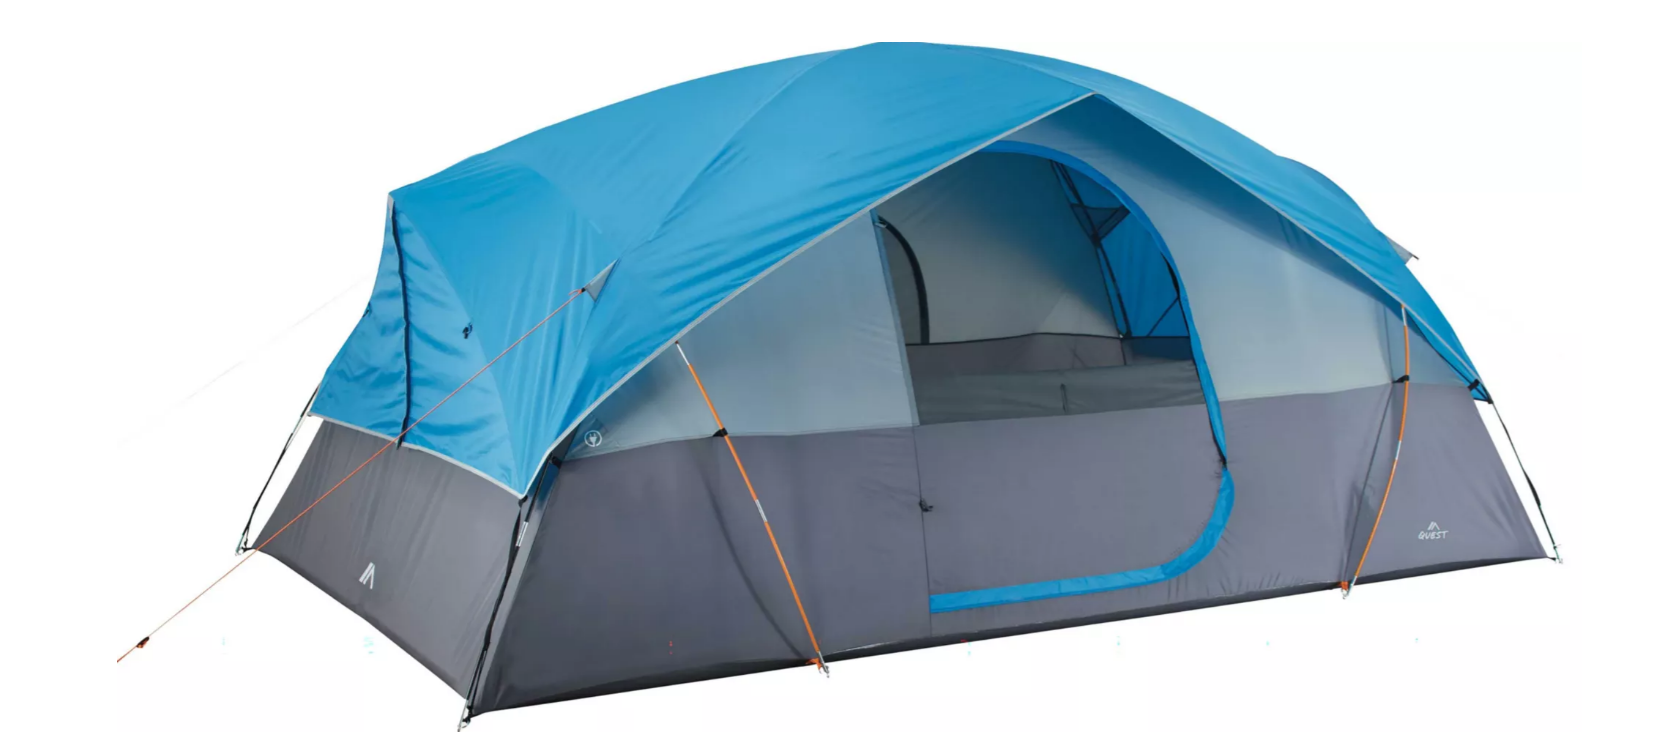 quest switchback 8 person tent black friday deal